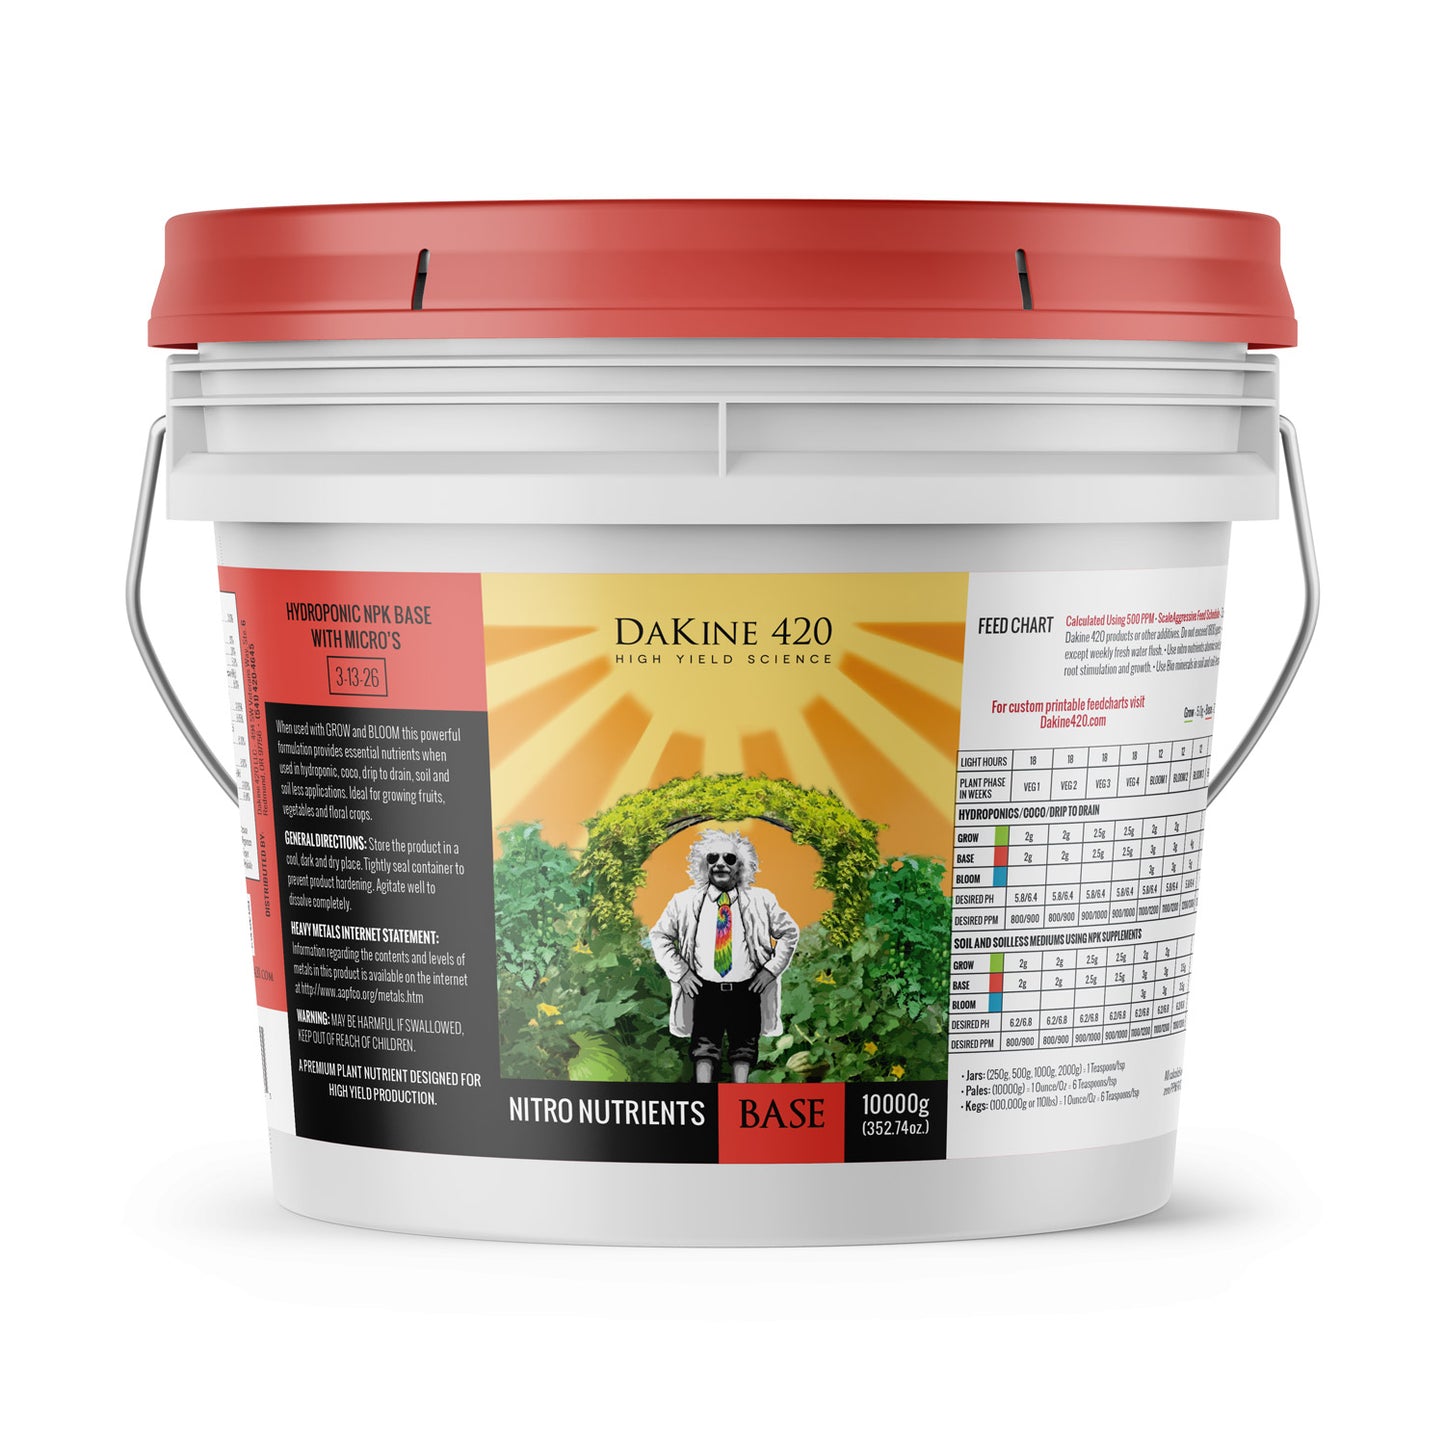 Nitro Nutrients BASE provides the ideal ratios for maximum vegetative growth, leading to fast-flowering results and plants that will just ooze THC. 